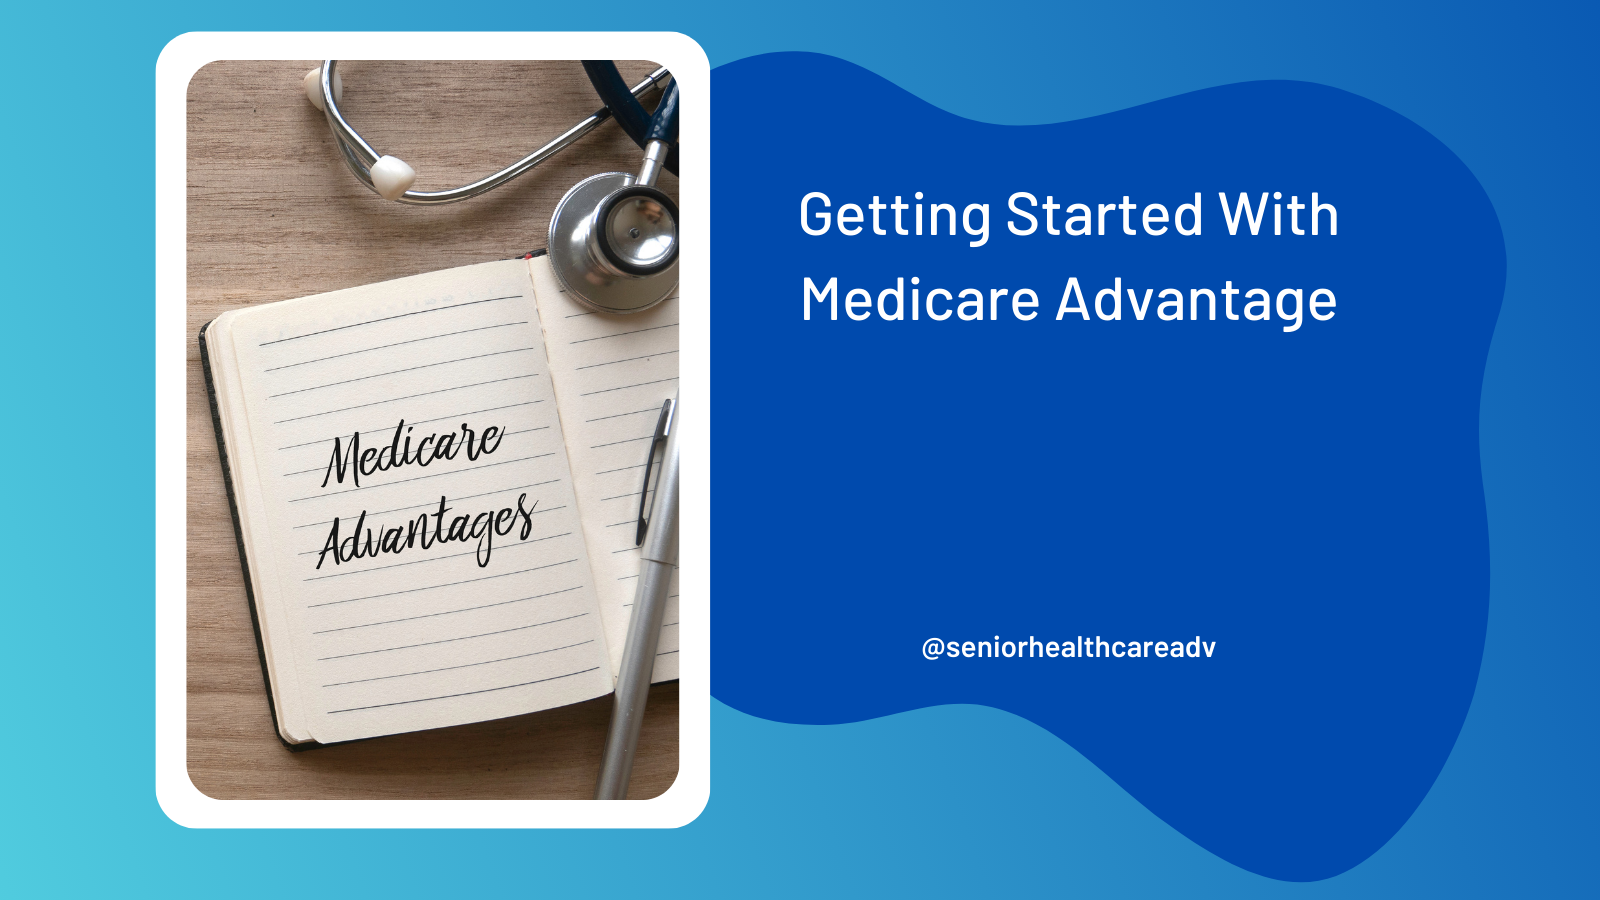 A notepad with "Medicare Advantage" written on it, along with a stethoscope, highlighting the beginning of the Medicare Advantage journey.